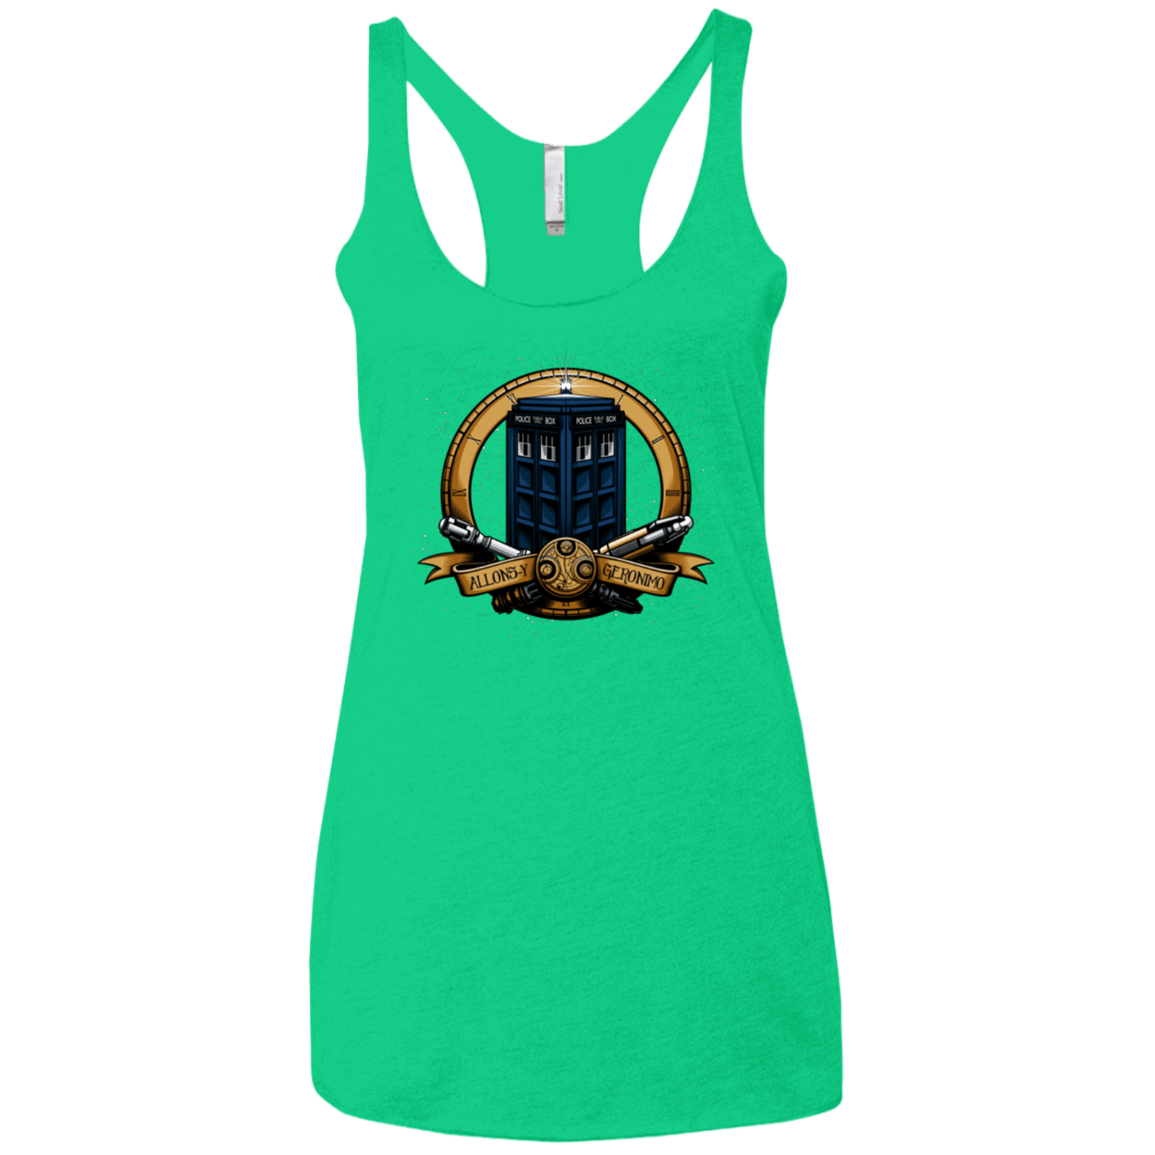 T-Shirts Envy / X-Small The Day of the Doctor Women's Triblend Racerback Tank